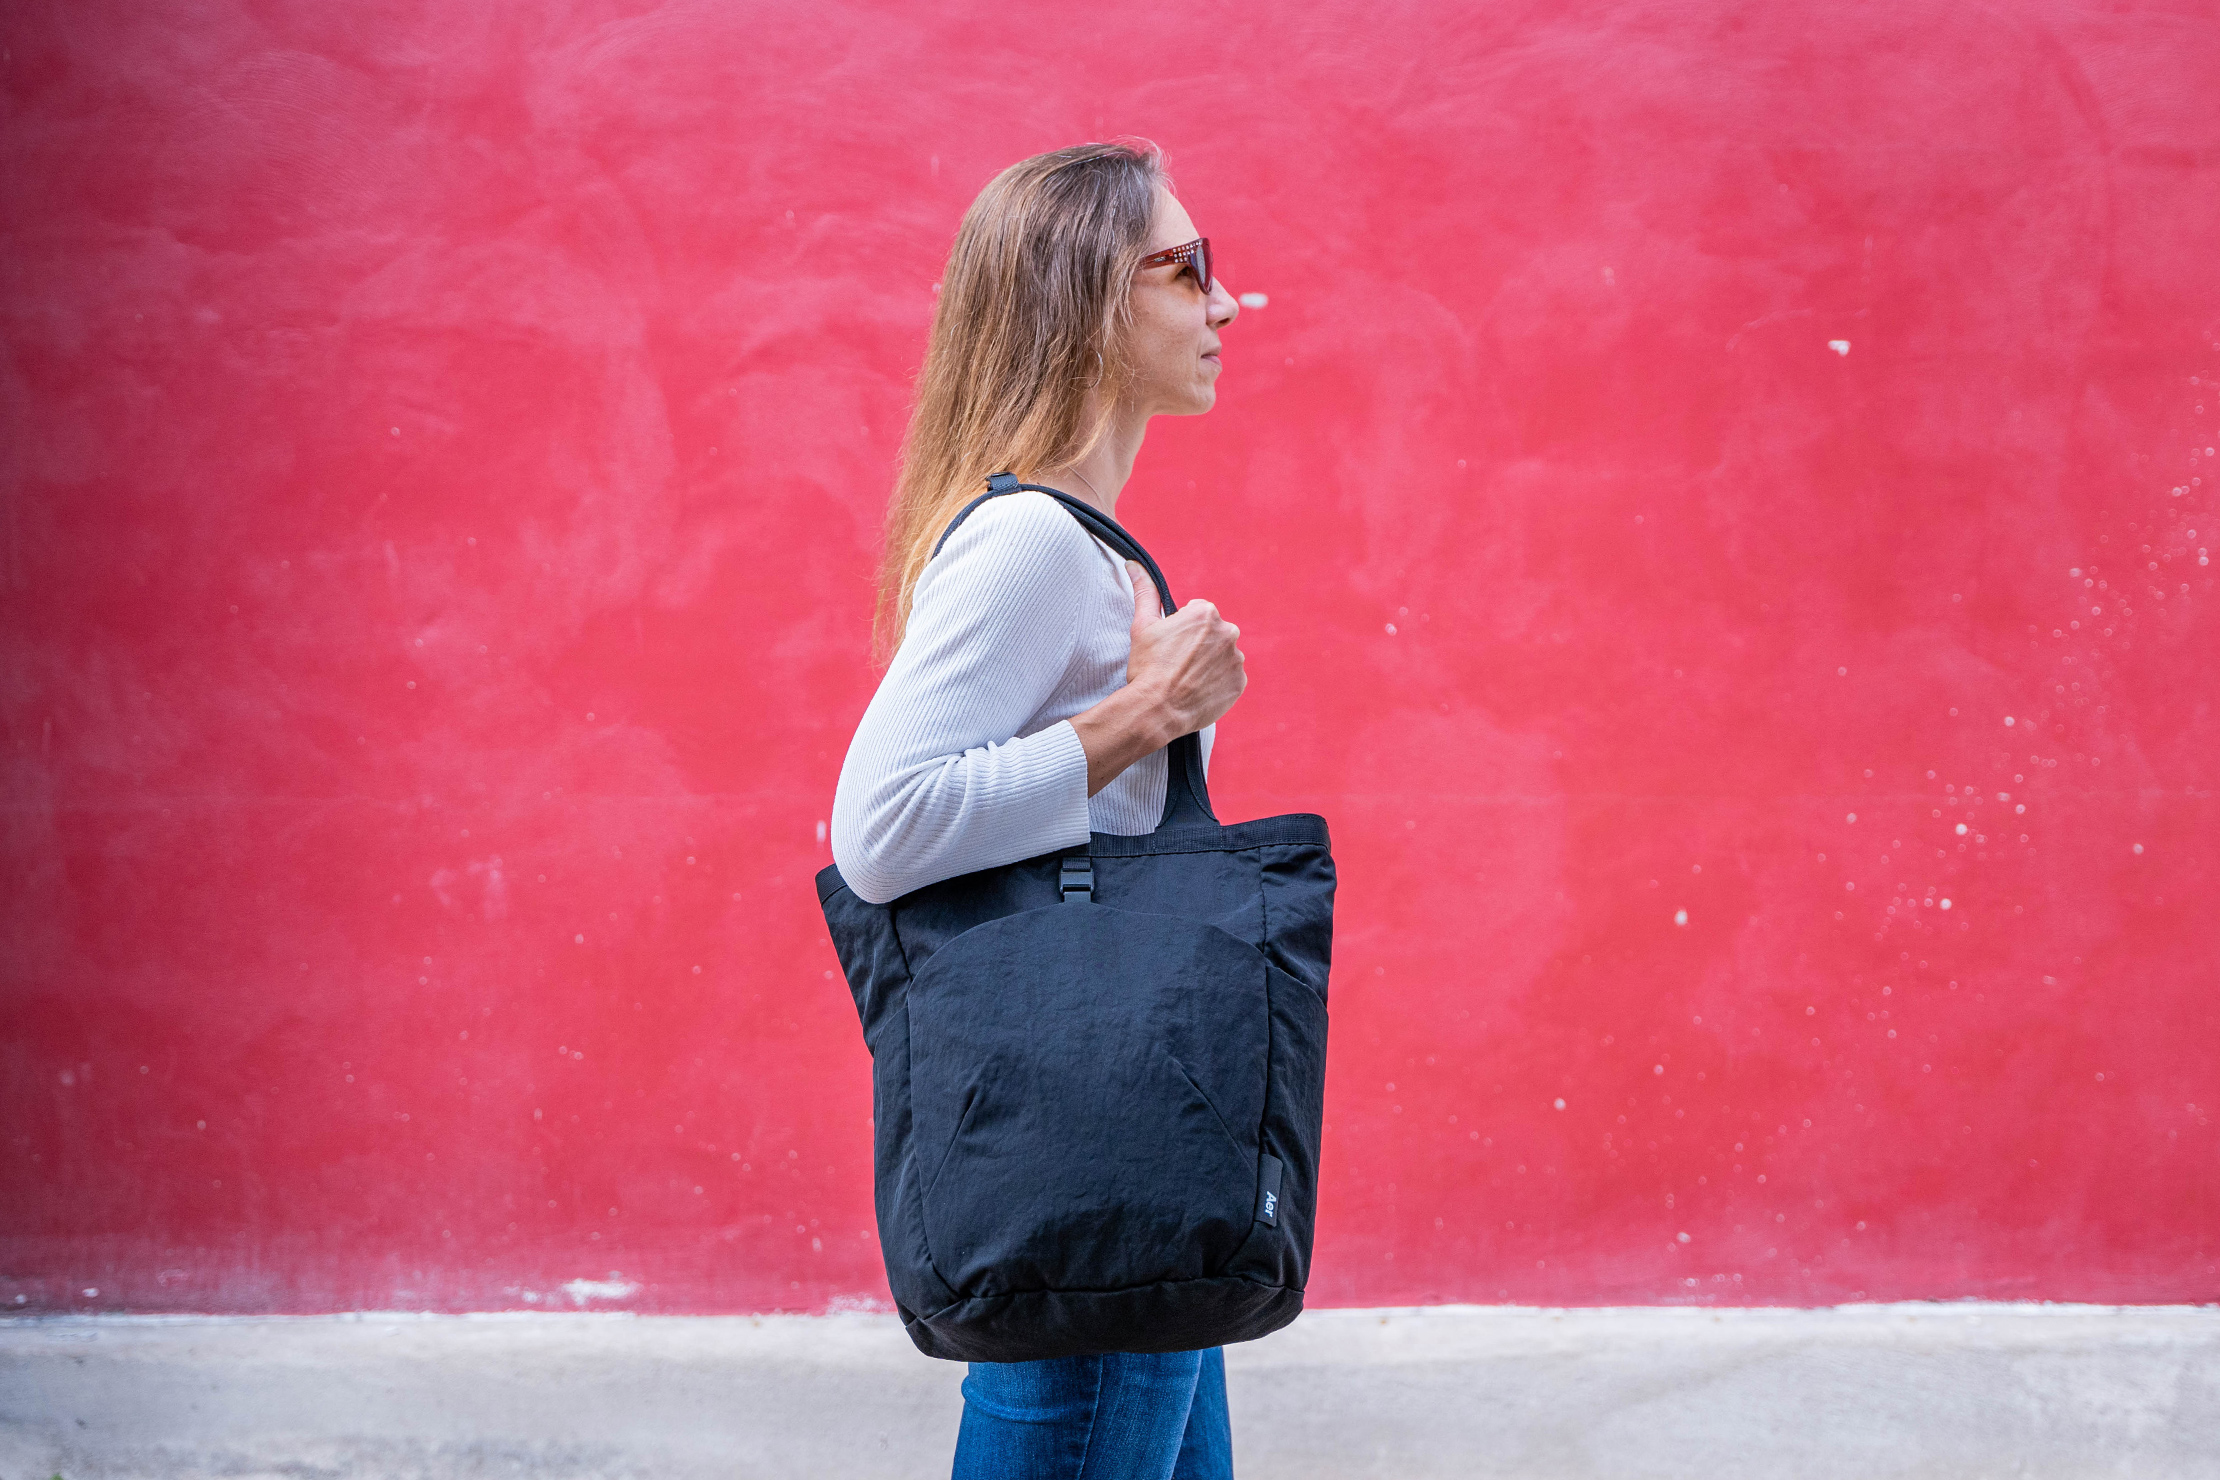 Aer Go Tote 2 Review